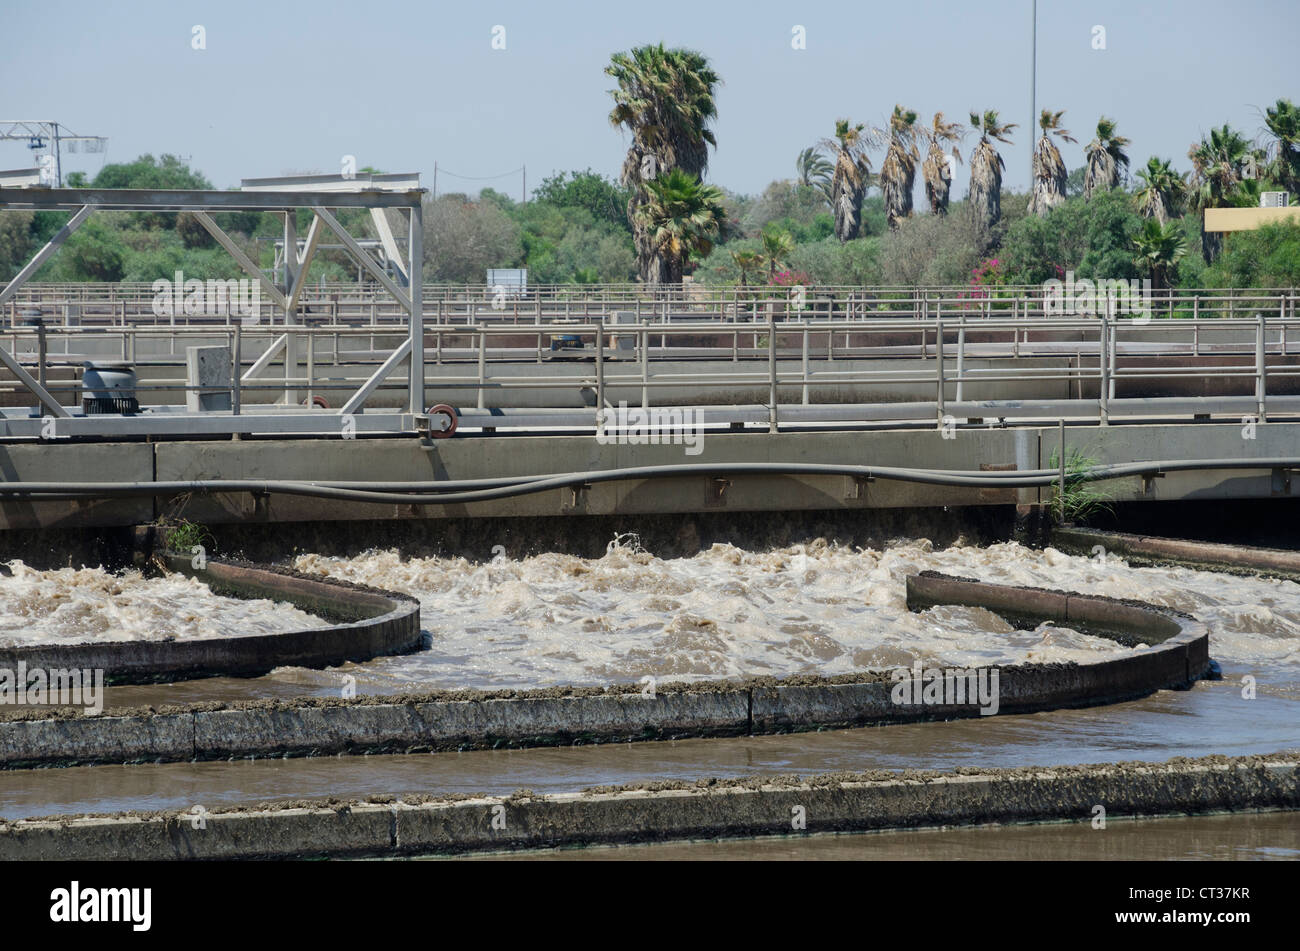 Visit in the Shafdan Wastewater Treatment Plant in Rishon Letsion on June 13, 2012, Rishon Letsion, Israel. Stock Photo